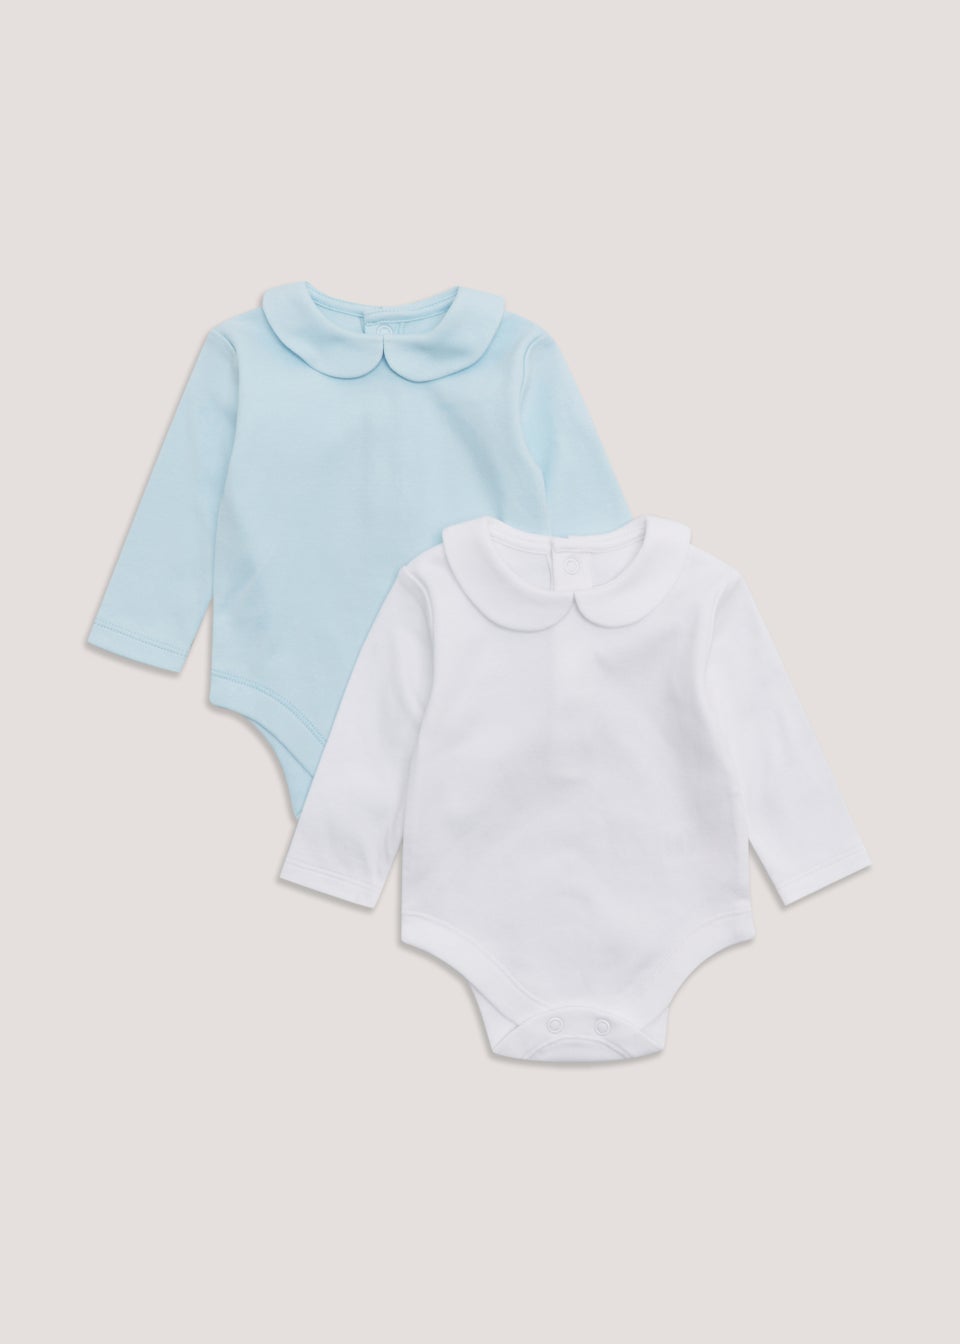 Baby 2 Pack Blue & White Layette Bodysuits (Tiny Baby-18mths)